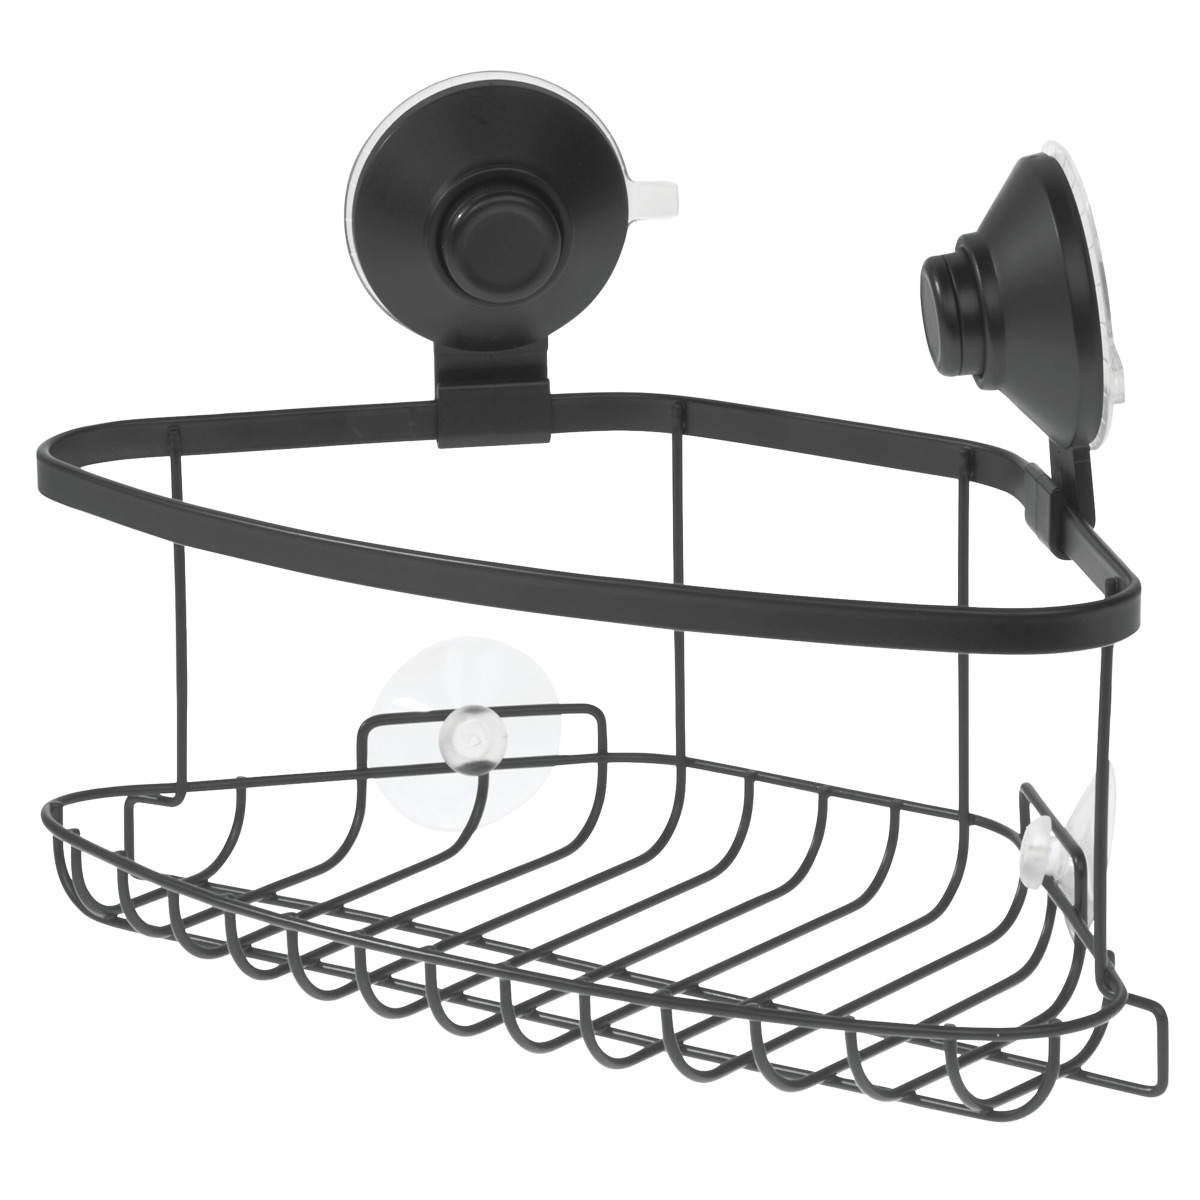 iDesign Everett Metal Push Lock Suction Corner Shower Caddy, Extra Space for Shampoo, Conditioner, and Soap with Hooks for RA